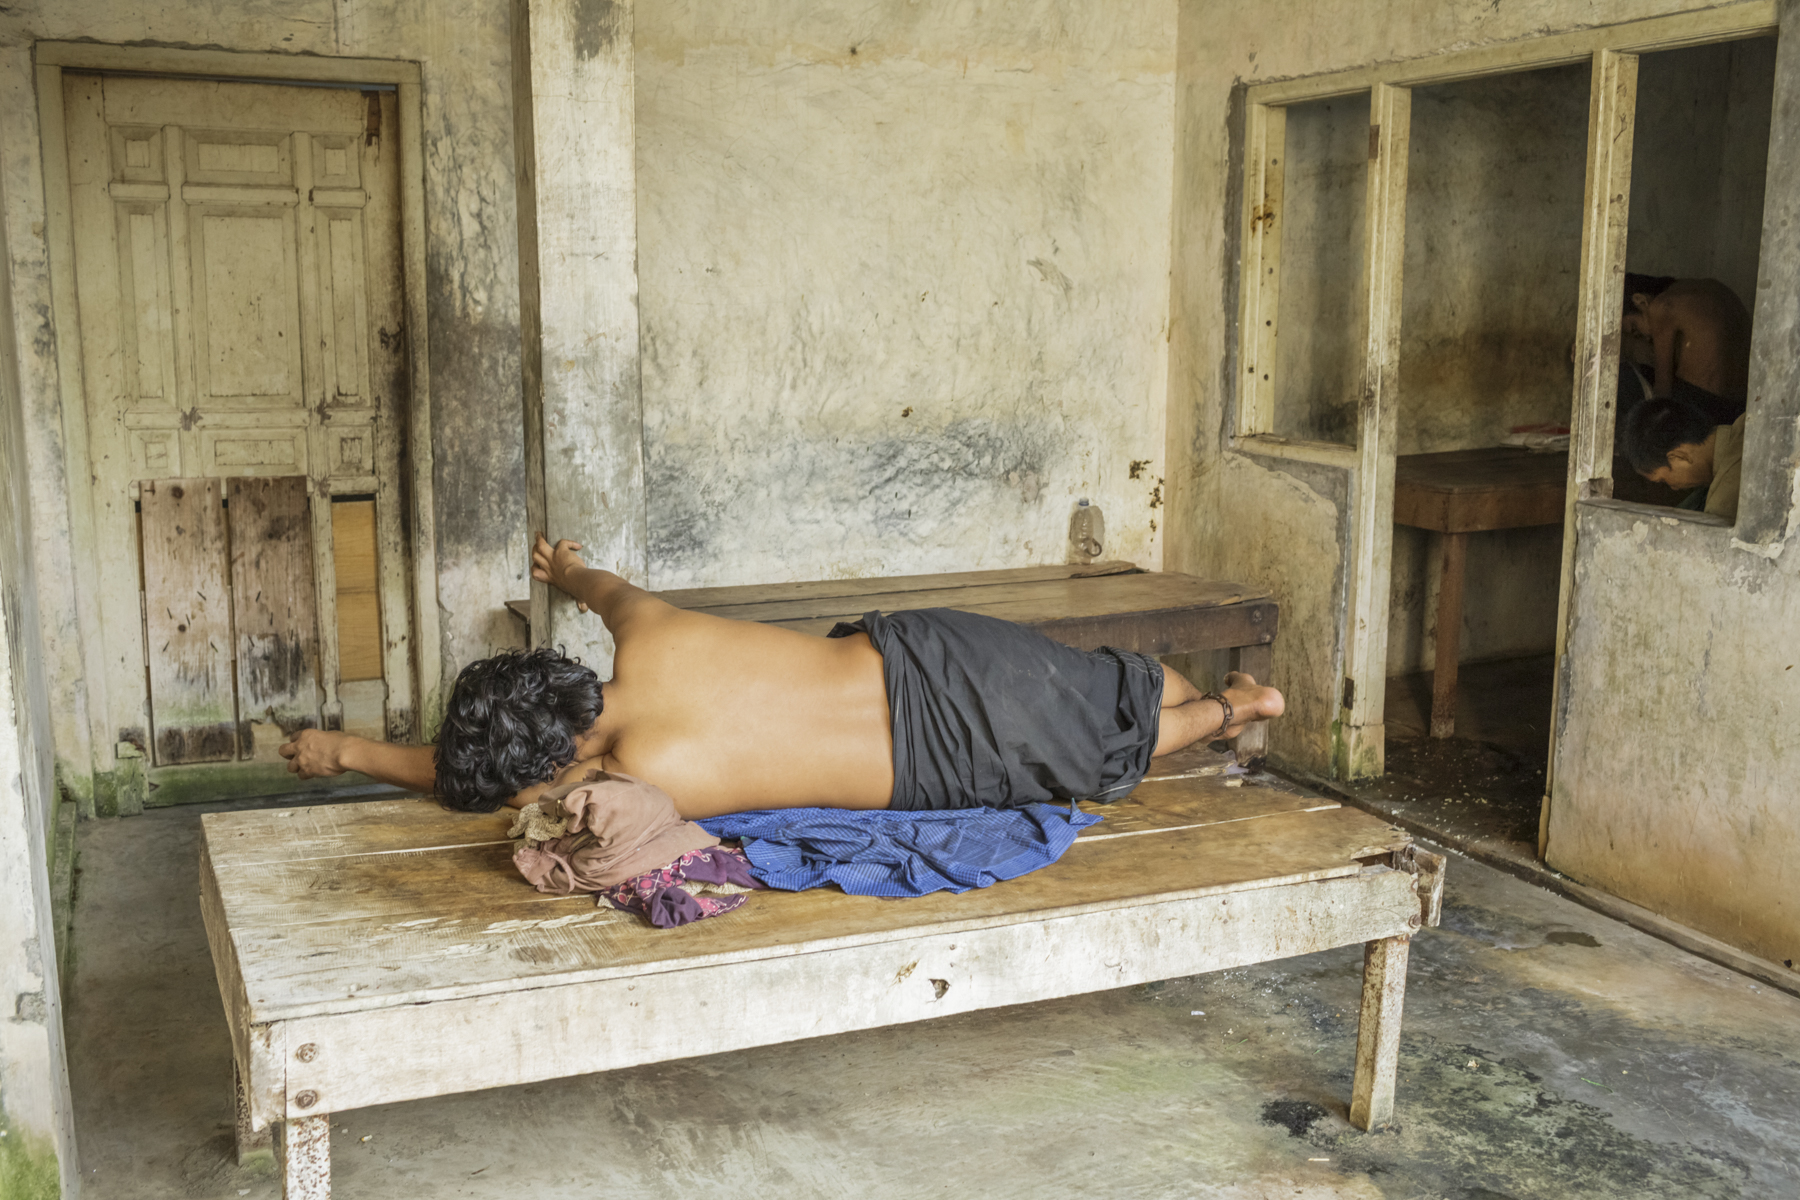 A man with a real or perceived psychosocial disability lying with his ankle chained to a platform bed in the Syamsul Ma’arif faith healing center in Brebes, Central Java. Photo: Andrea Star Reese for Human Rights Watch